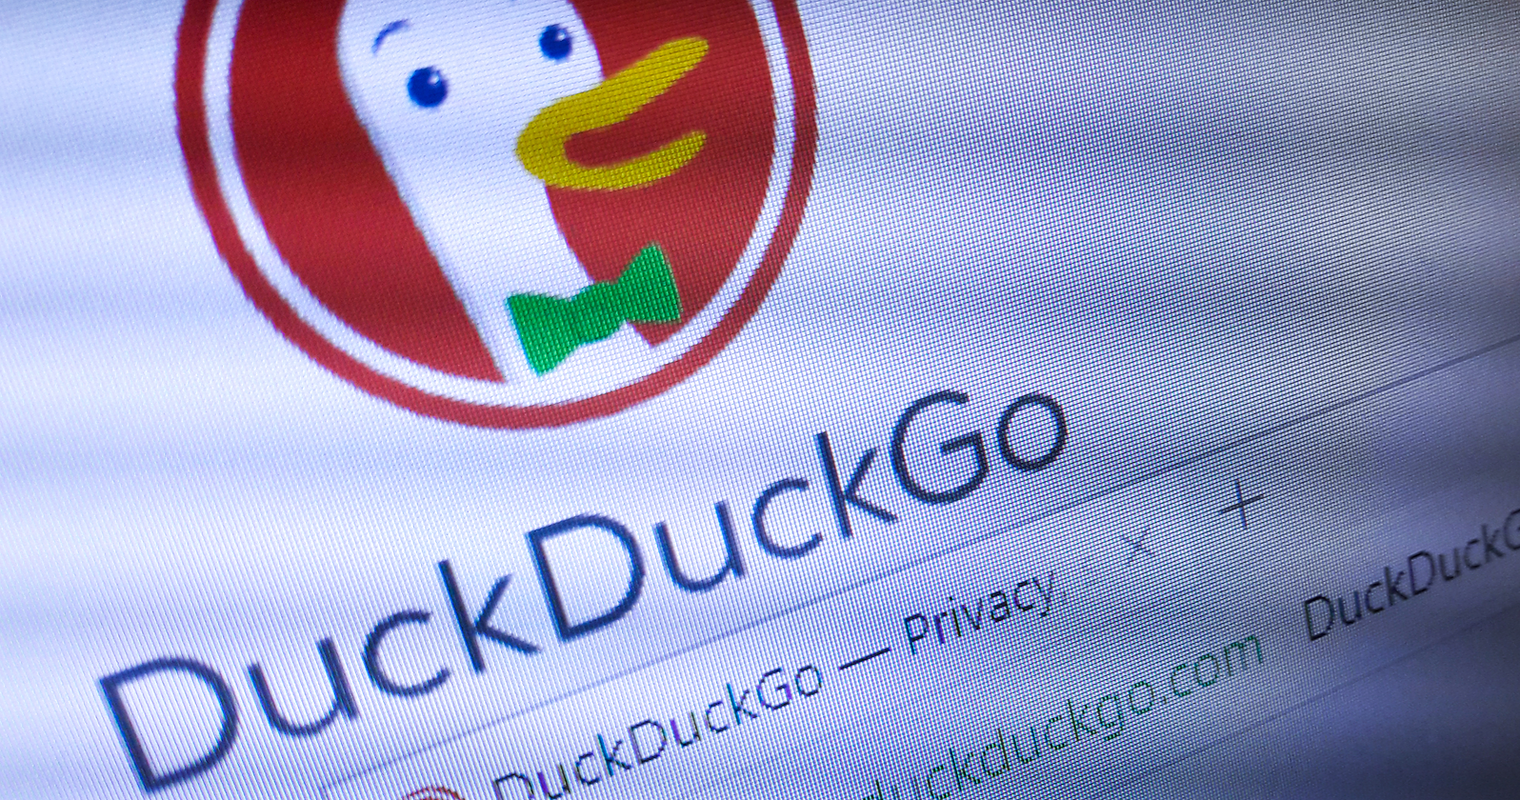 Google Transfers Ownership of Duck.com to DuckDuckGo